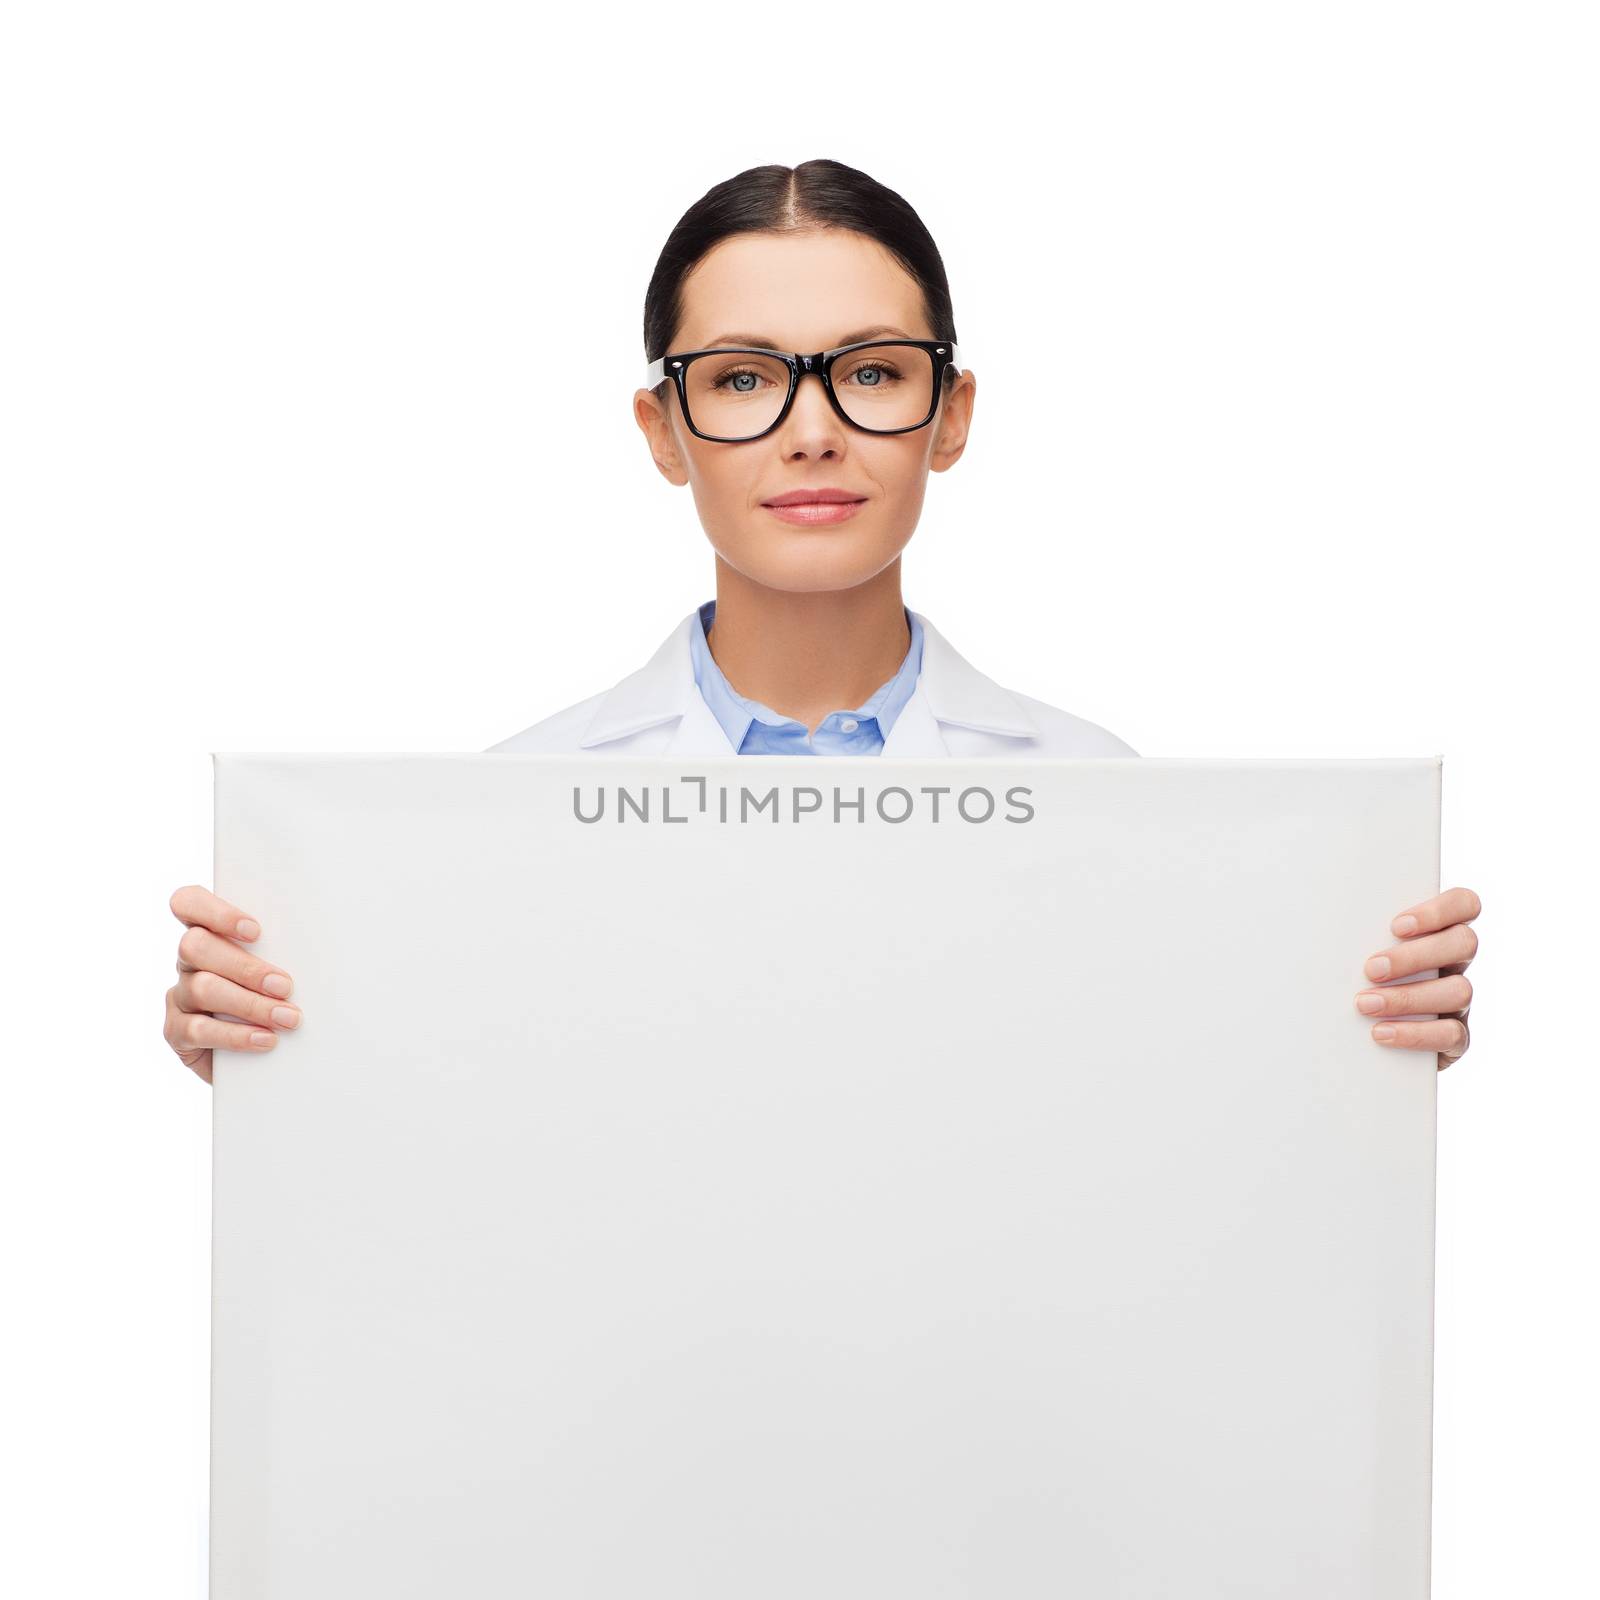 healthcare, advertisement and medicine concept - smiling female doctor in eyeglasses with white blank board